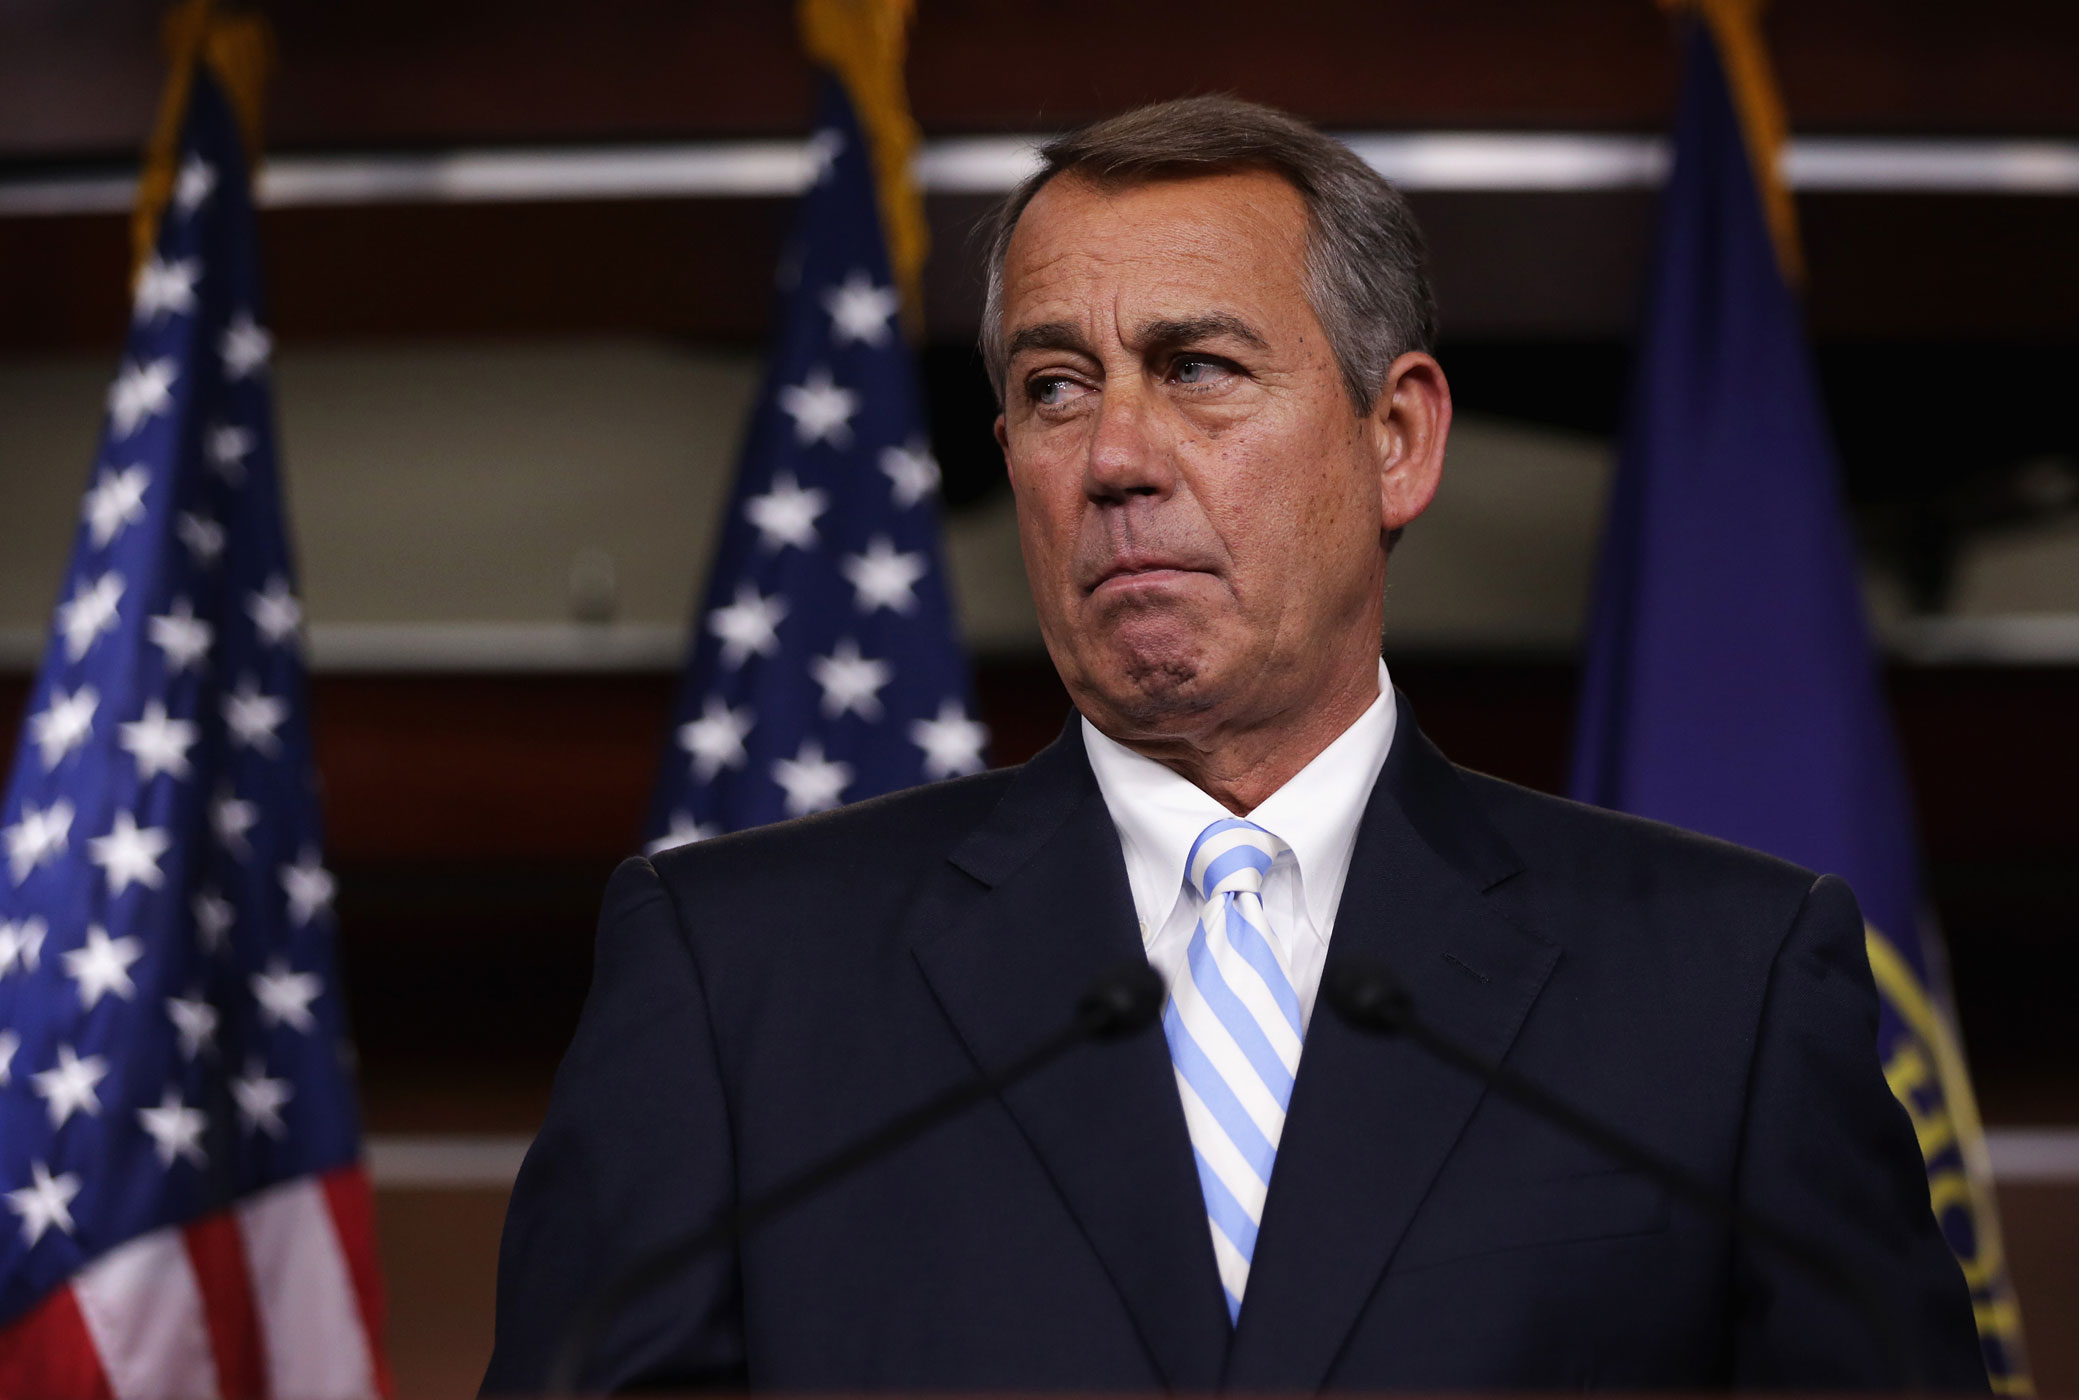 U.S. Speaker of the House Rep. John Boehner during a press briefing on July 31, 2014 on Capitol Hill in Washington, DC. (Alex Wong—Getty Images)